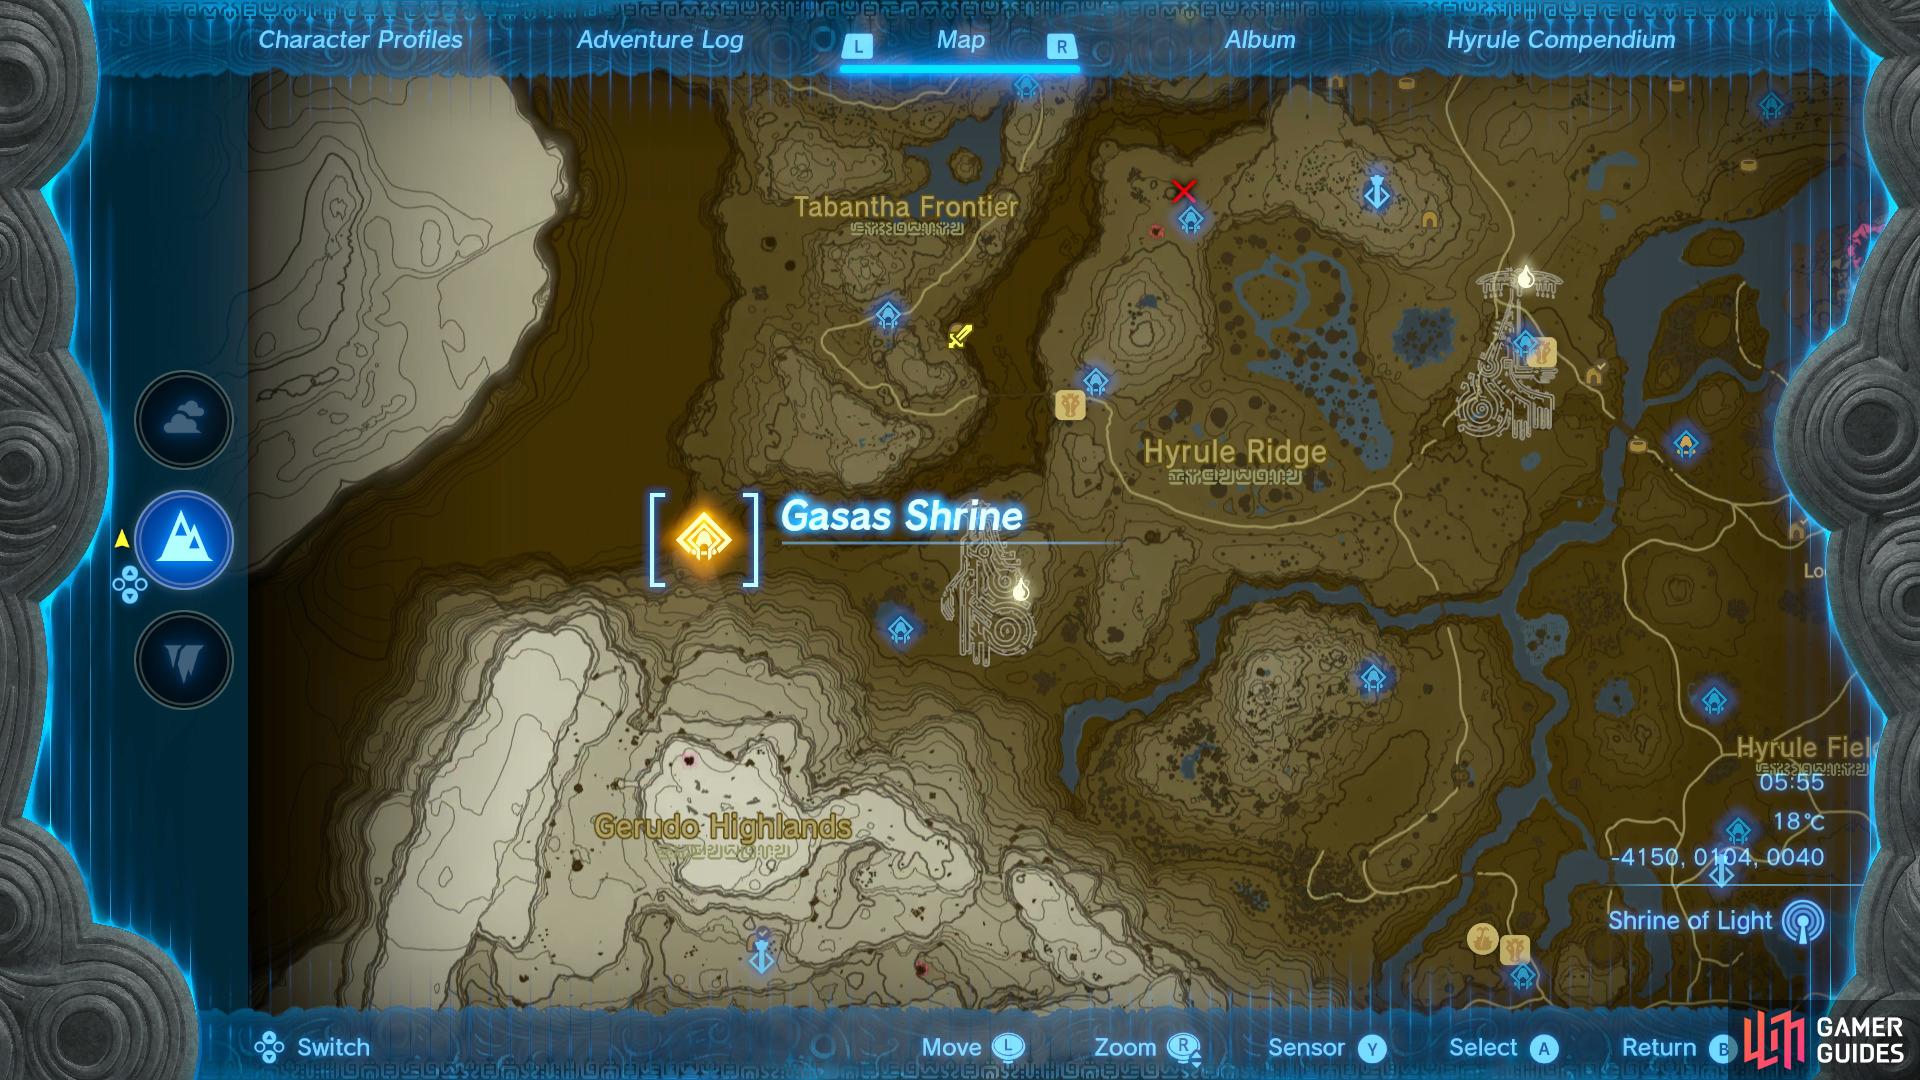 Head to this location on the map to find the Gasas Shrine entrance.